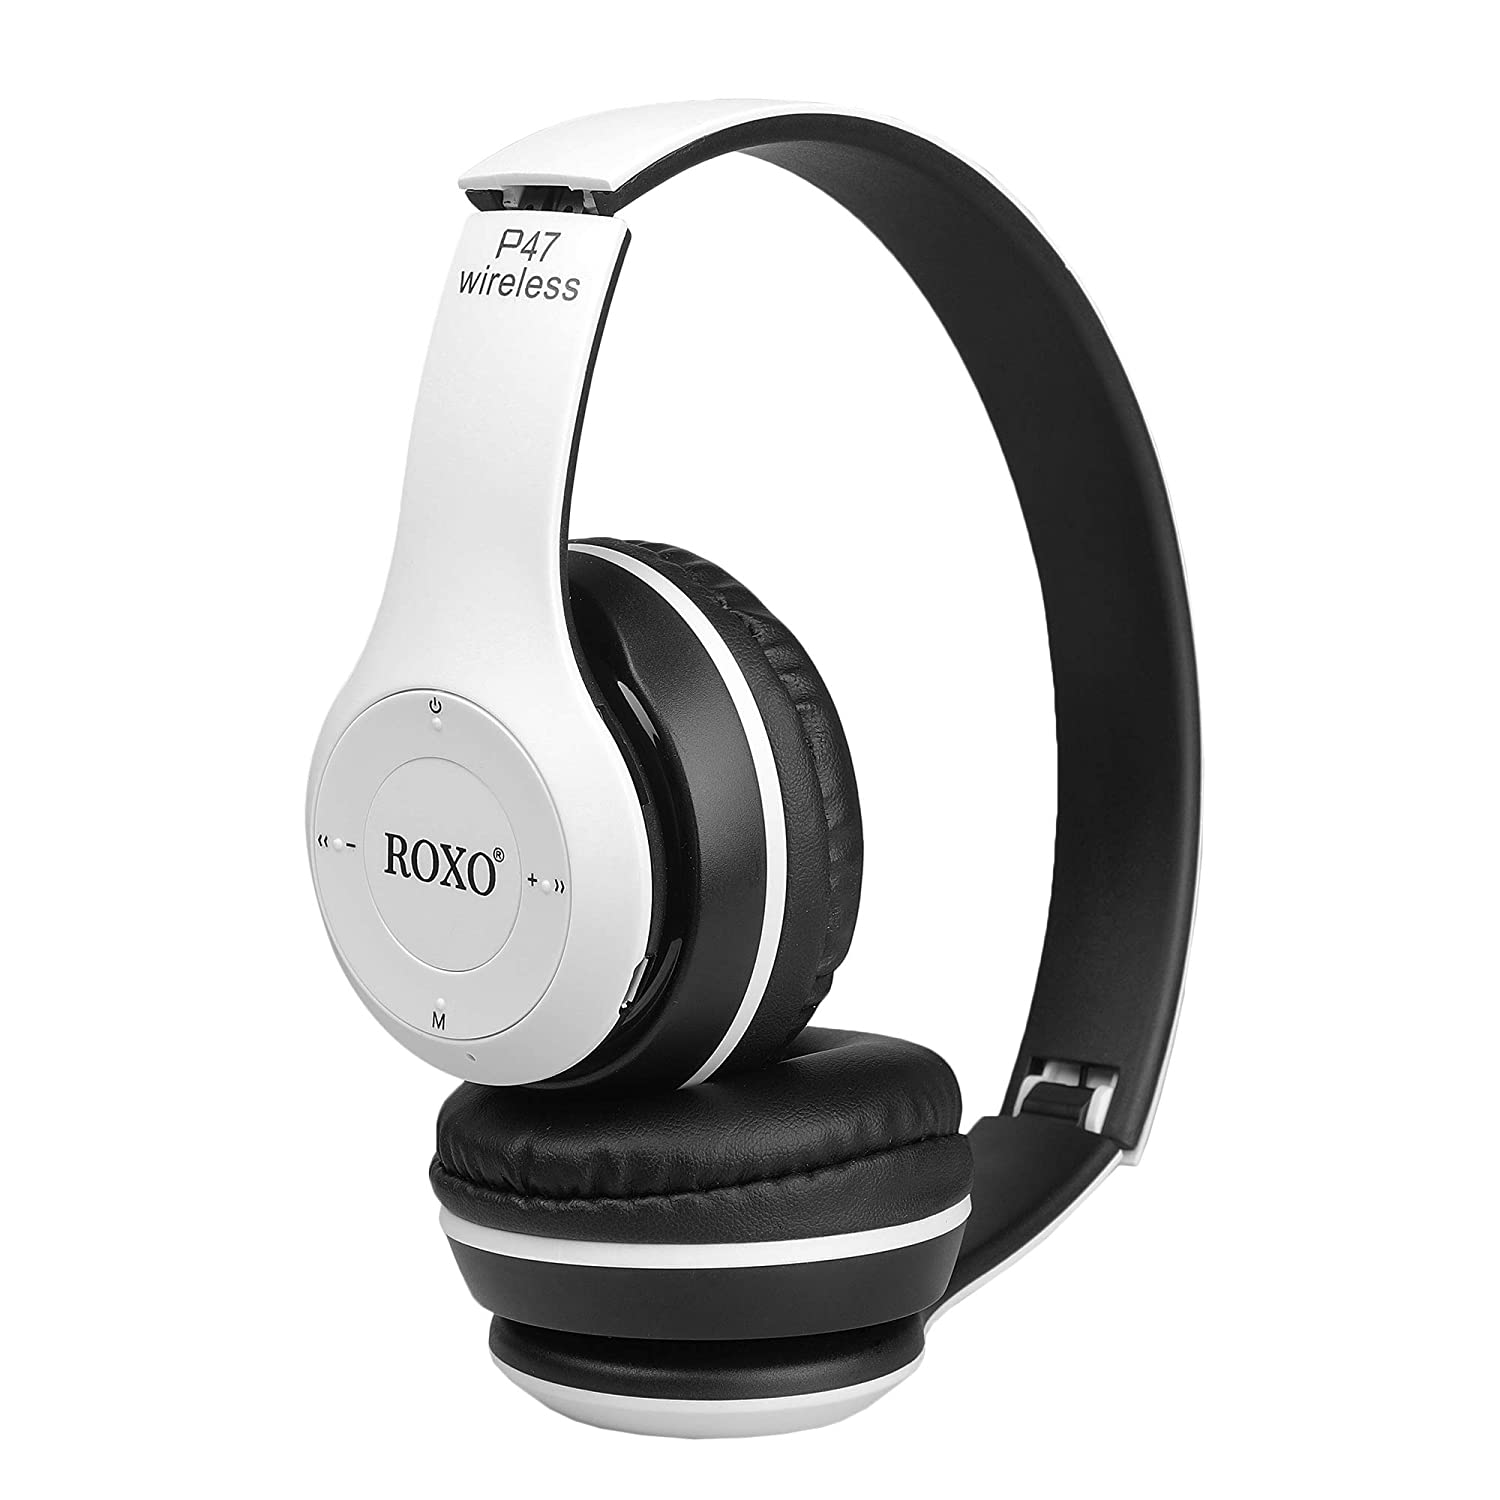 ROXO P47 Wireless Bluetooth Portable Sports Headphones with Microphone, Stereo Fm,Memory Card Support (White)